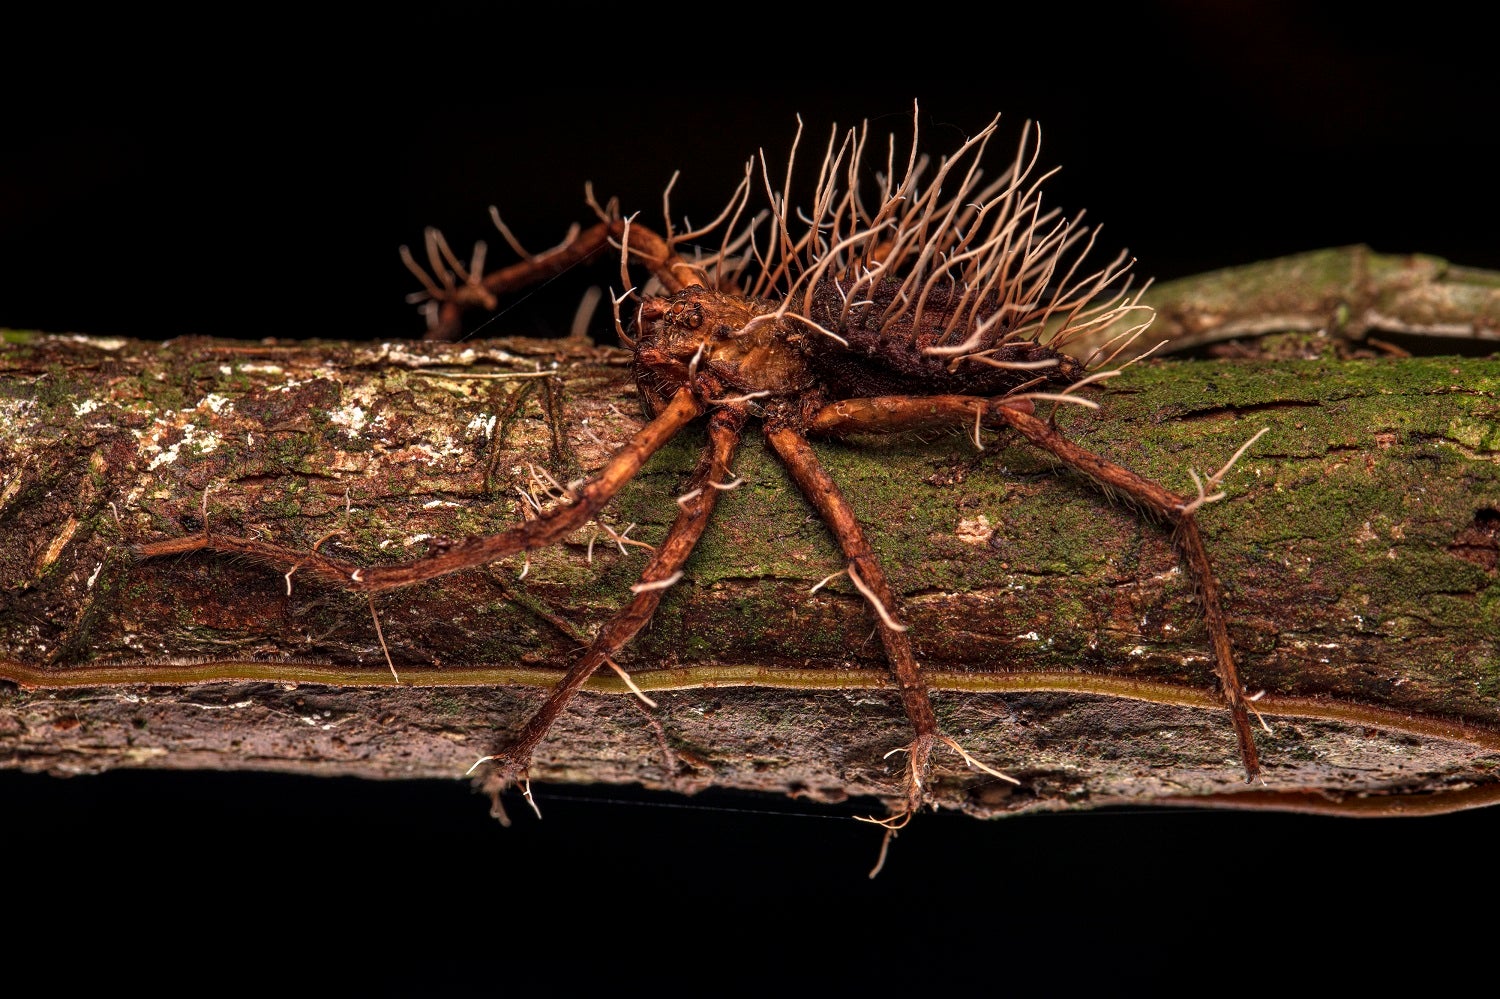 Brown spider on wood parasitized by fungus